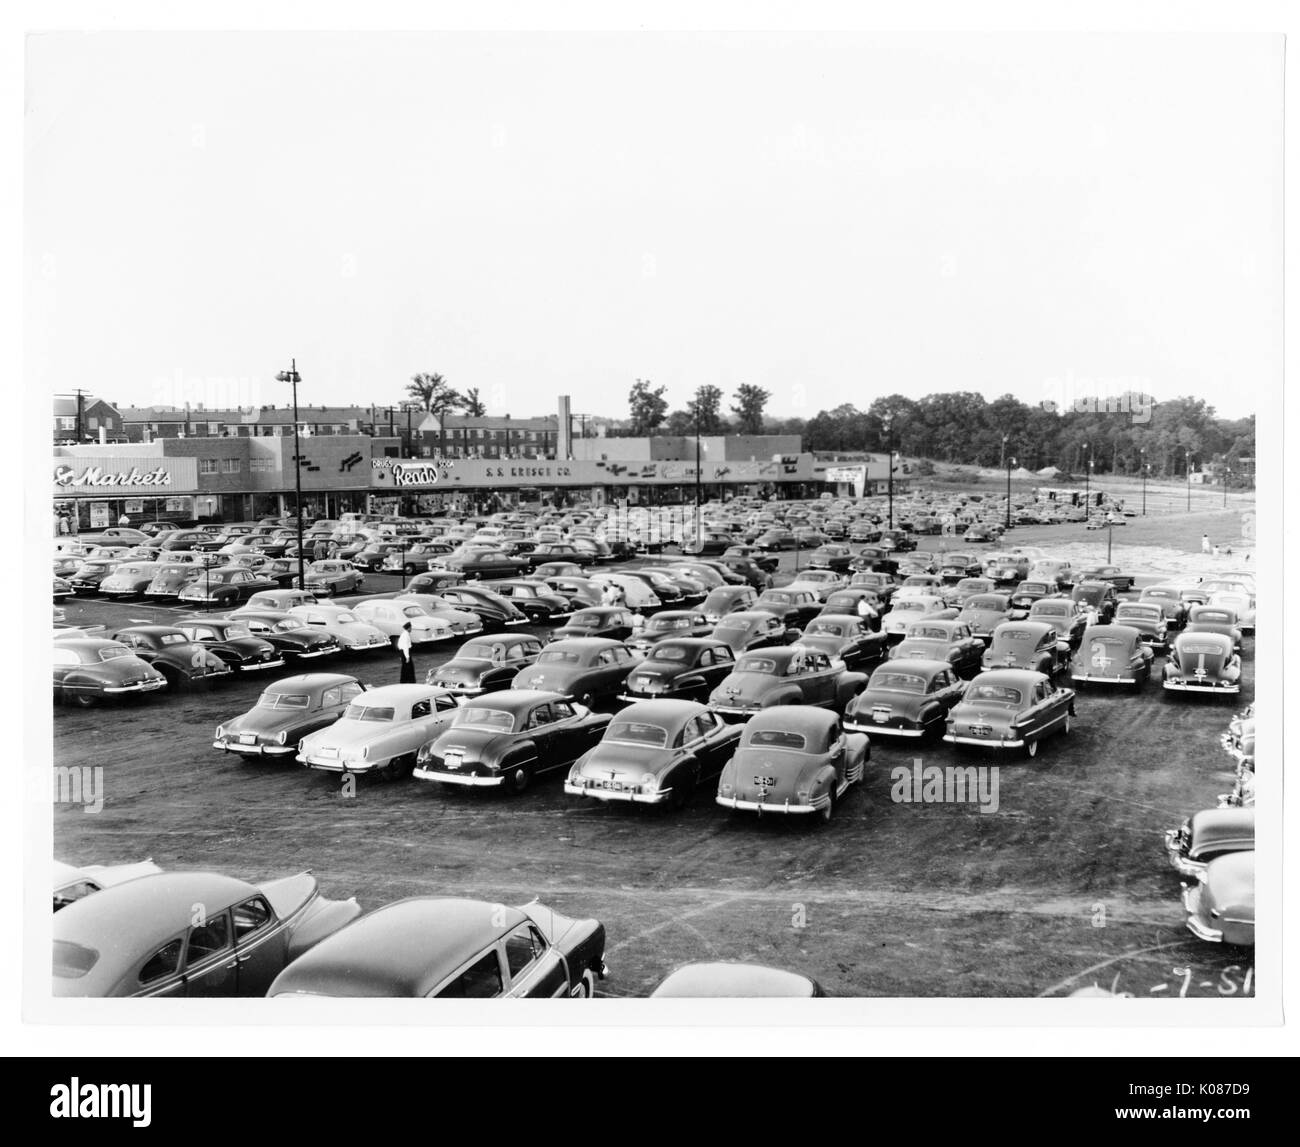 Parking lot of Northwood Shopping Center with hundreds of cars, stores in background including Acme Markets and Reads, trees and homes in background, parking lot has many city lights, Baltimore, Maryland, 1930. Stock Photo